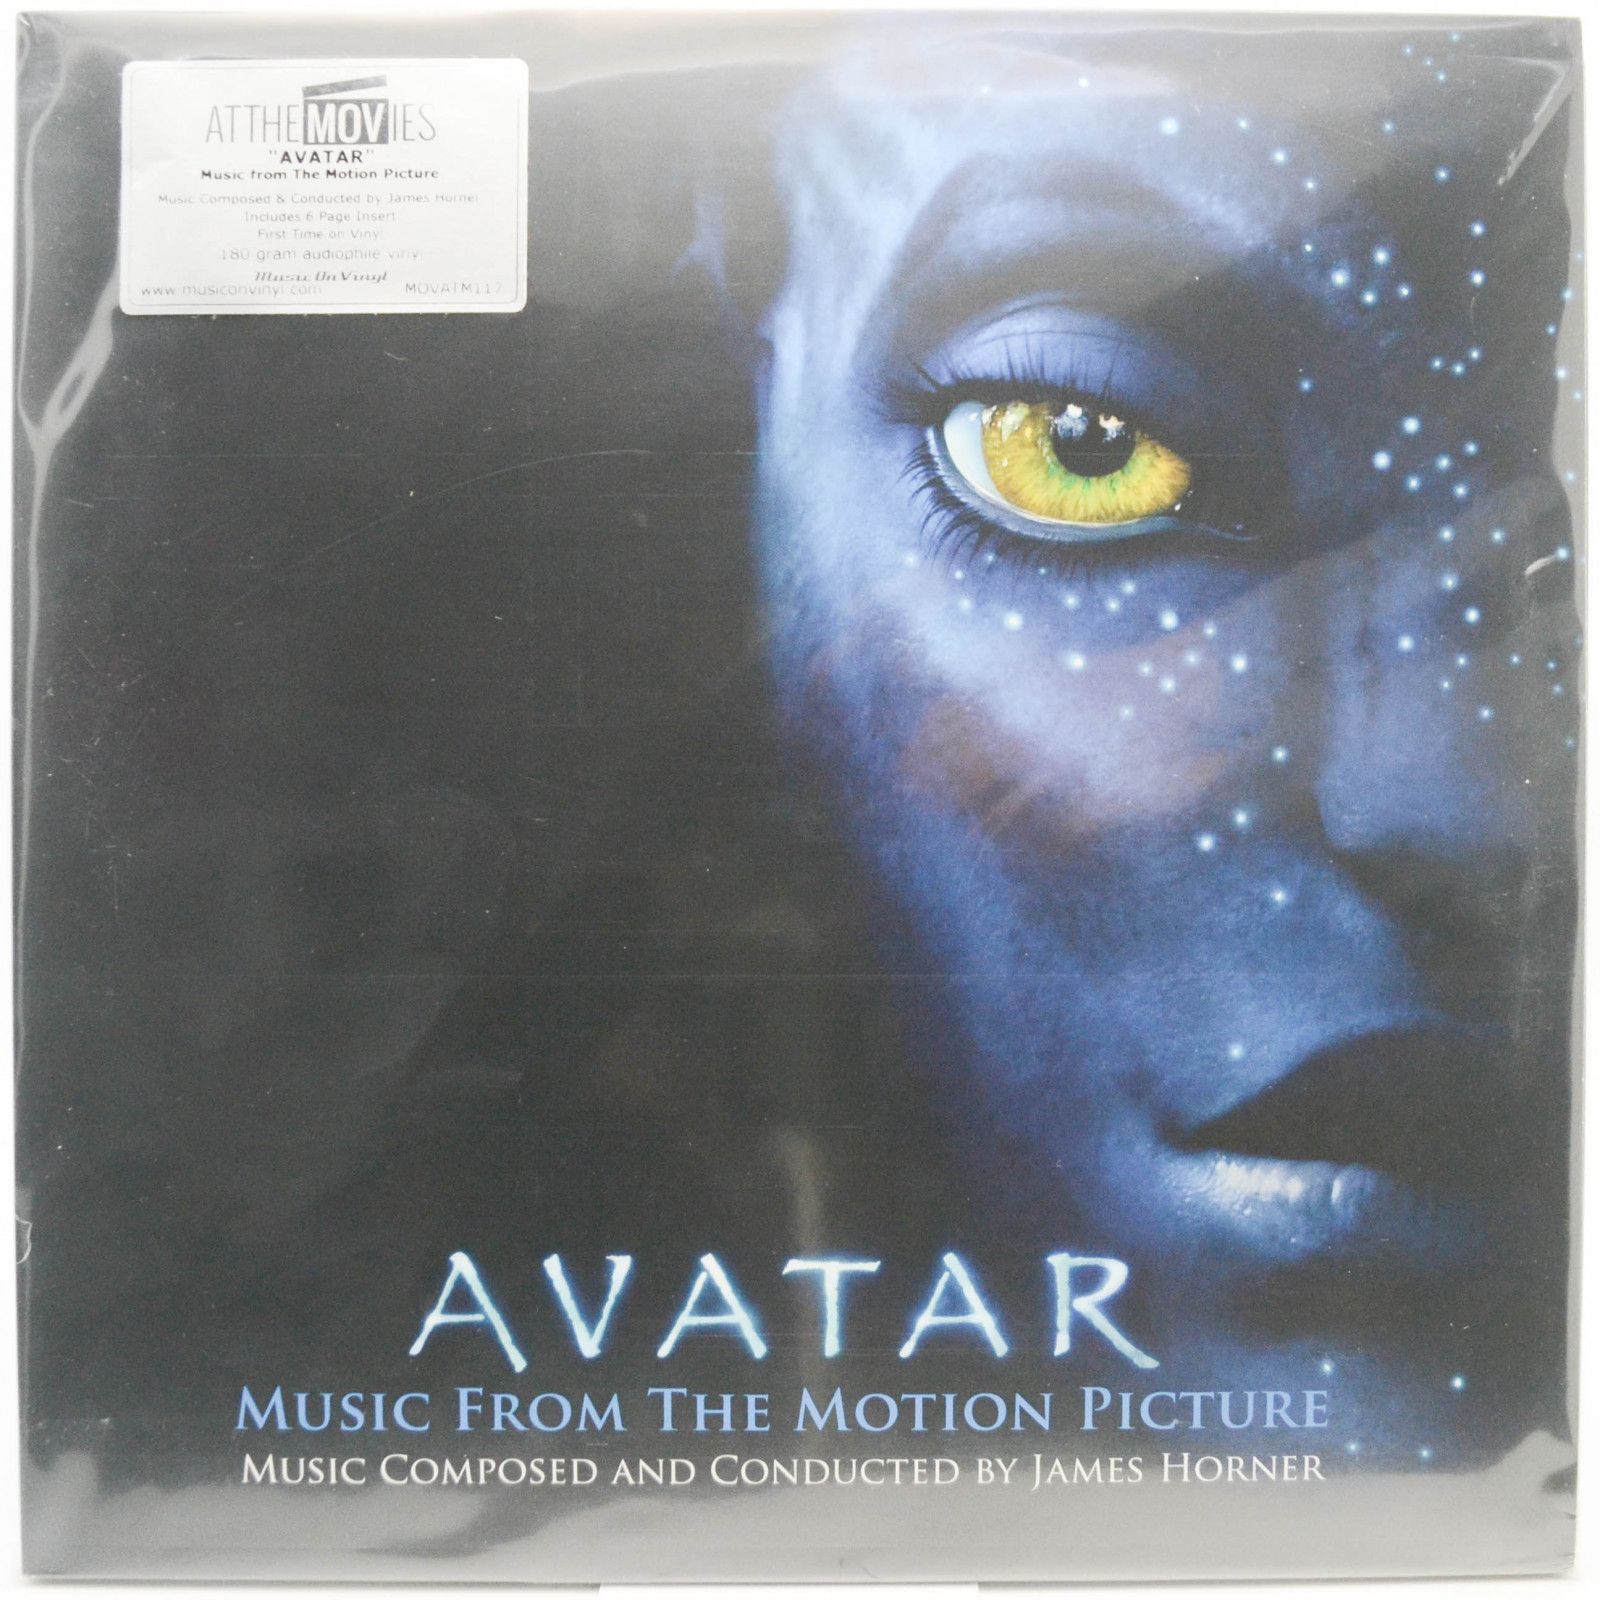 James Horner — Avatar (Music From The Motion Picture) (2LP), 2009